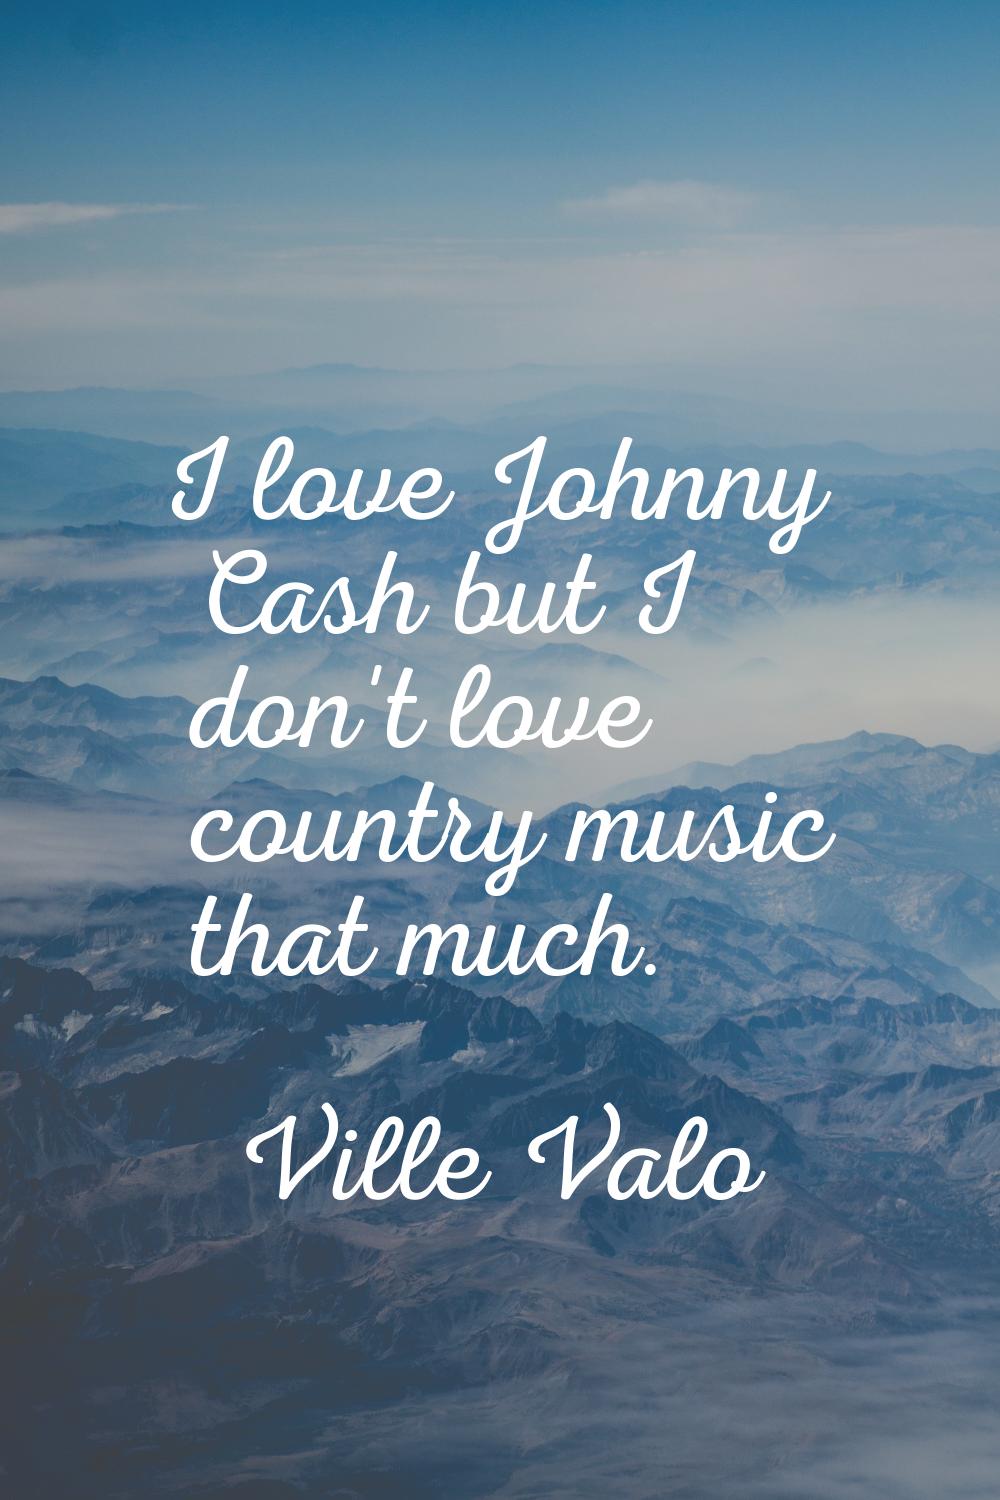 I love Johnny Cash but I don't love country music that much.